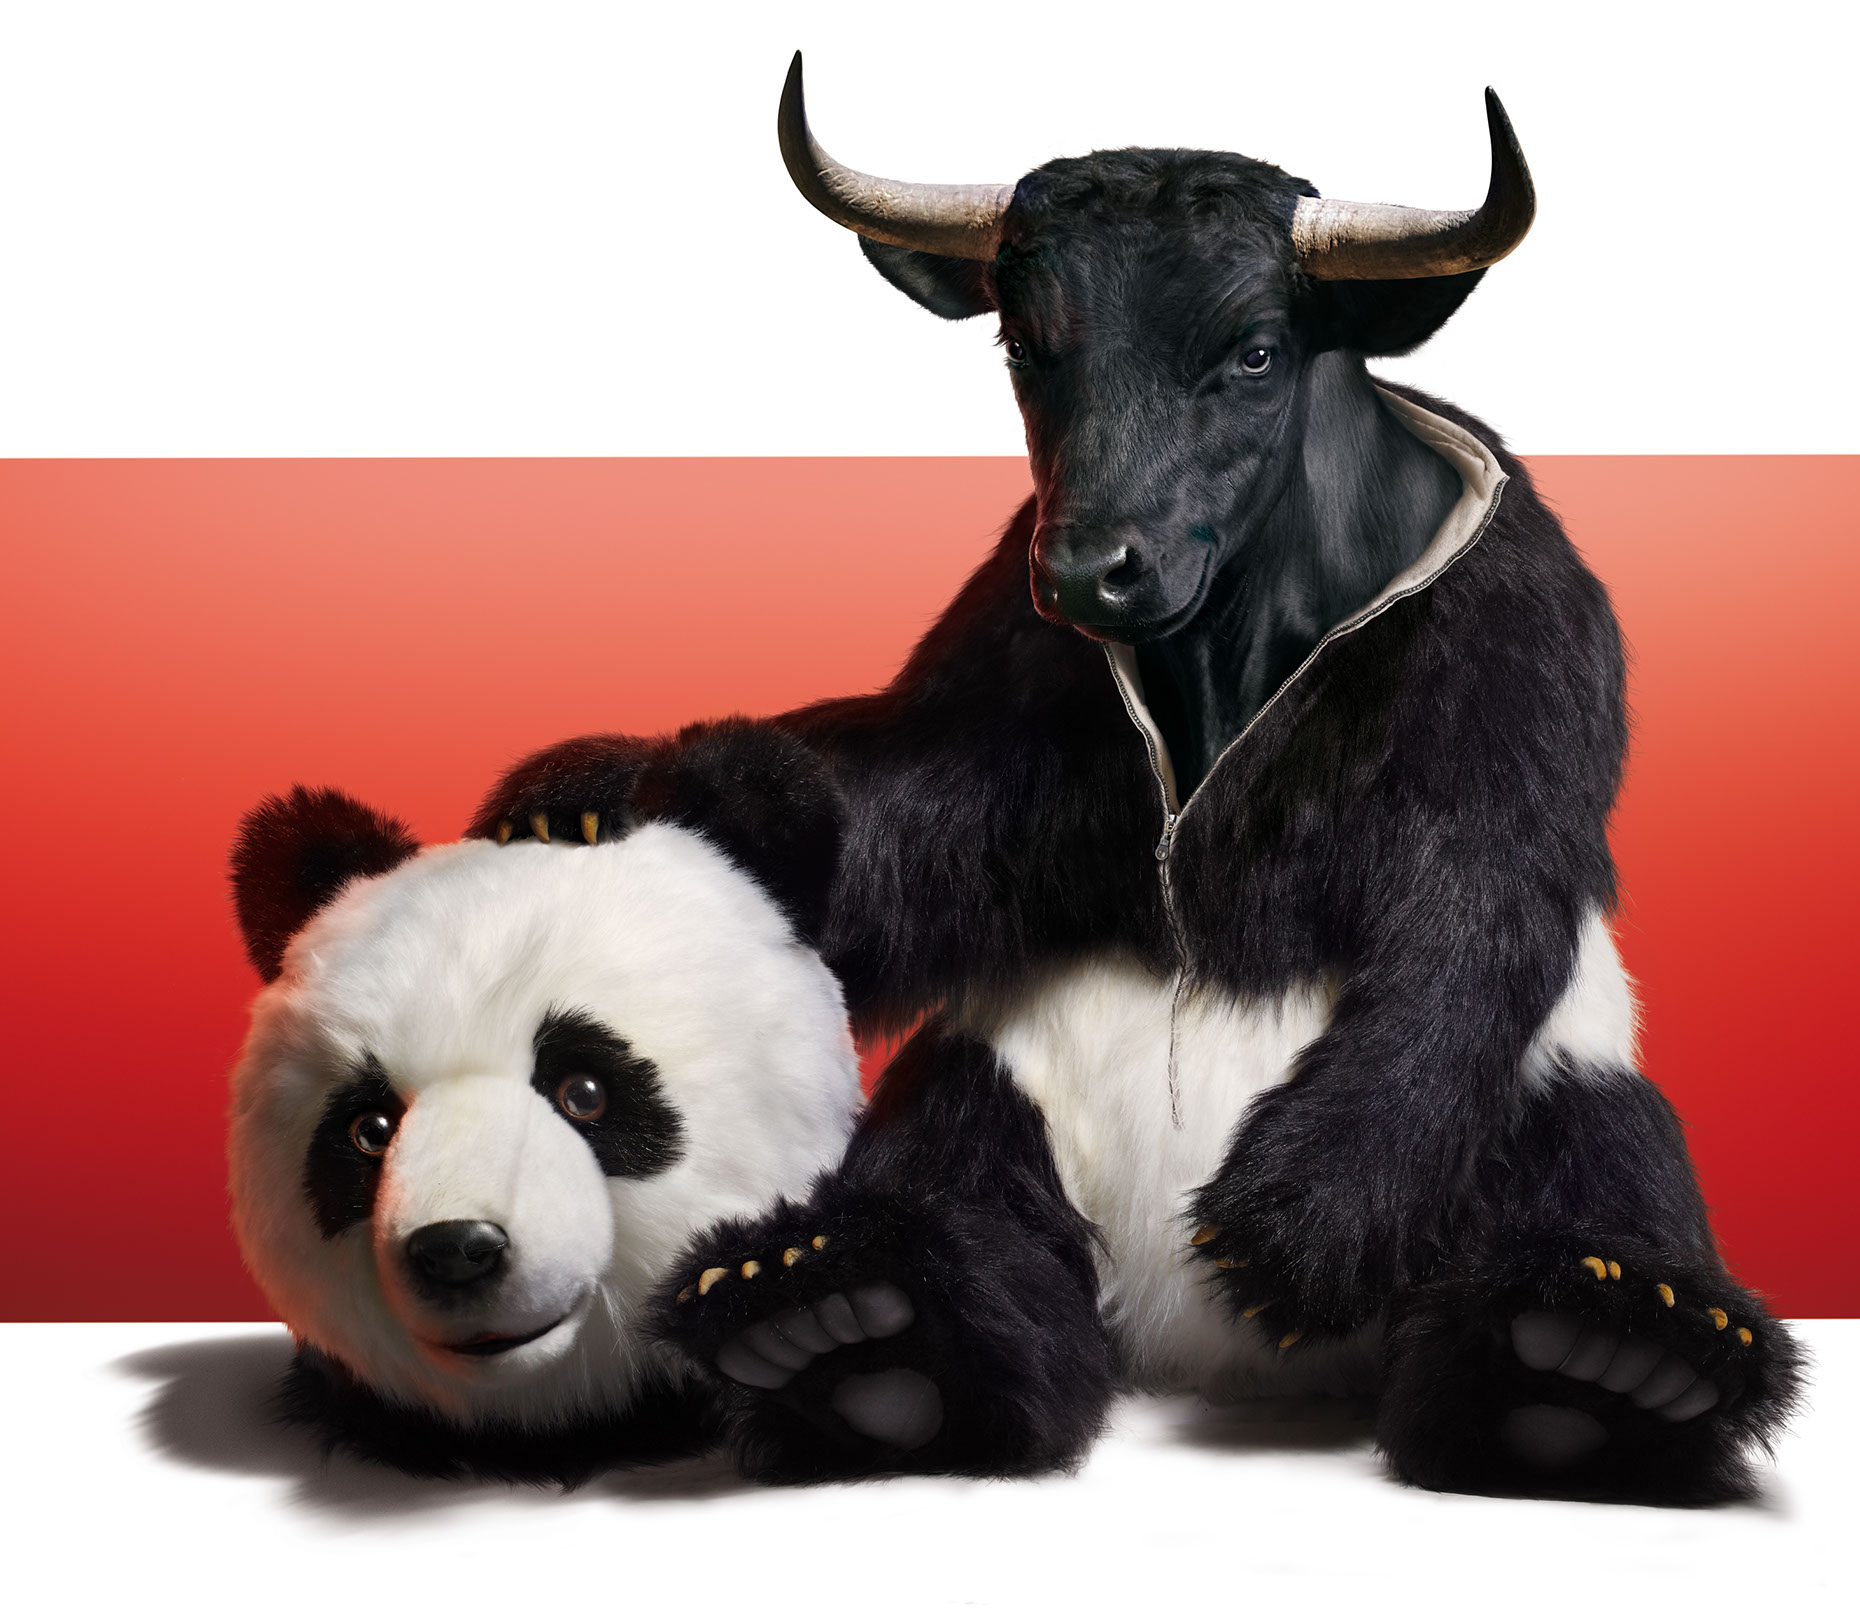 Photo-Imaging_Animals and Nature_Bull in a panda suit-Frank Neidhardt